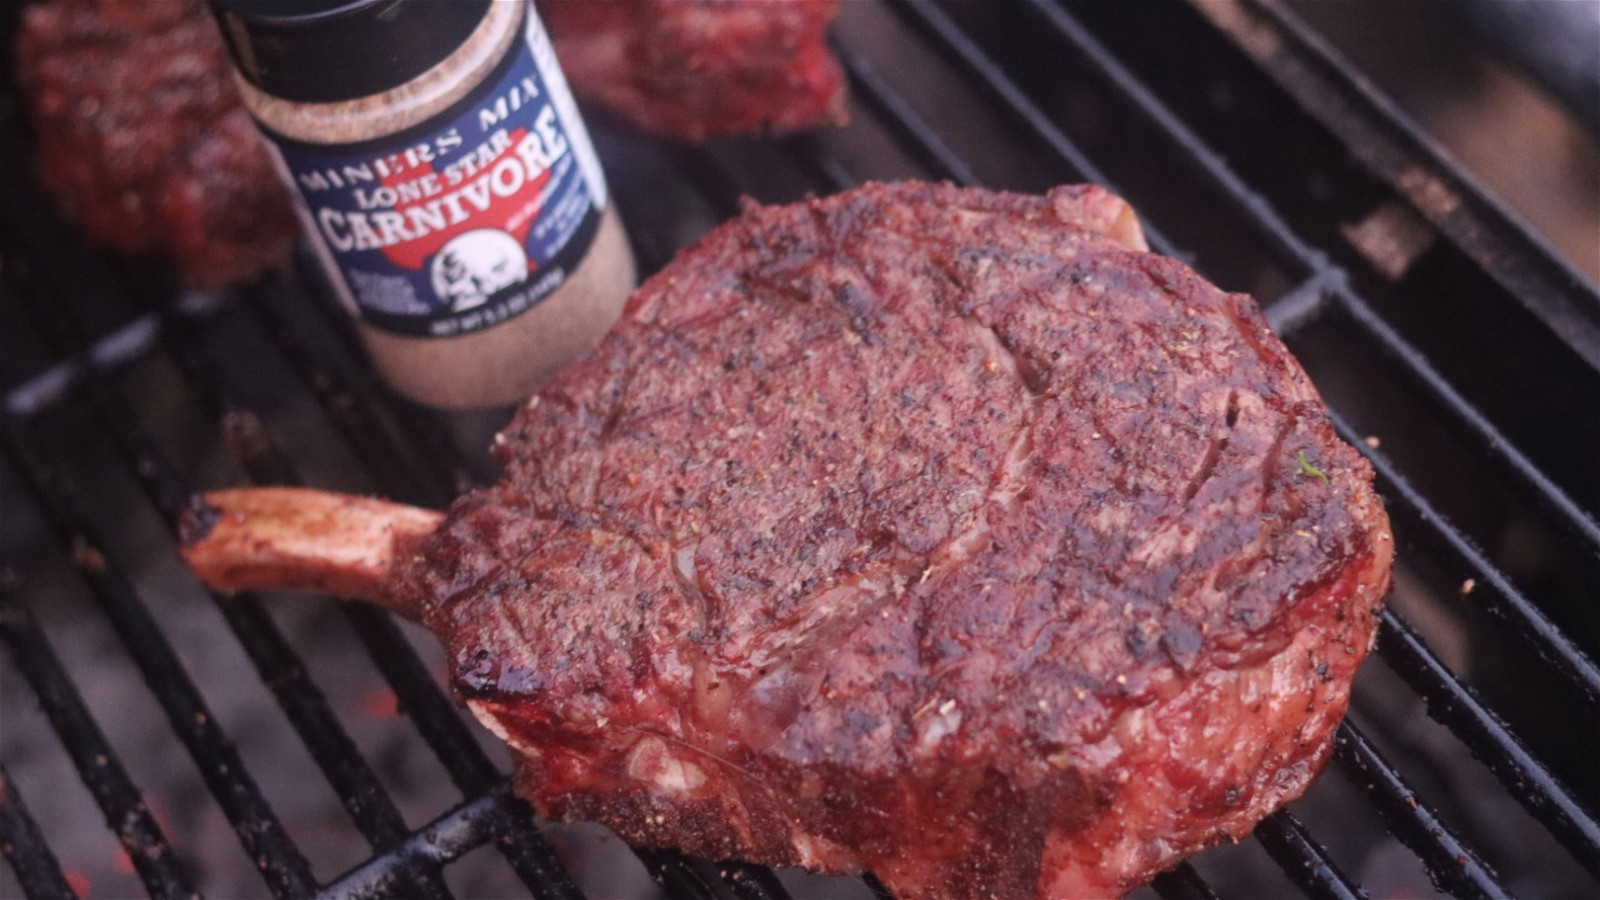 Image of Cowboy Ribeye feat. Lone Star Carnivore All-Purpose Rub by Miners Mix